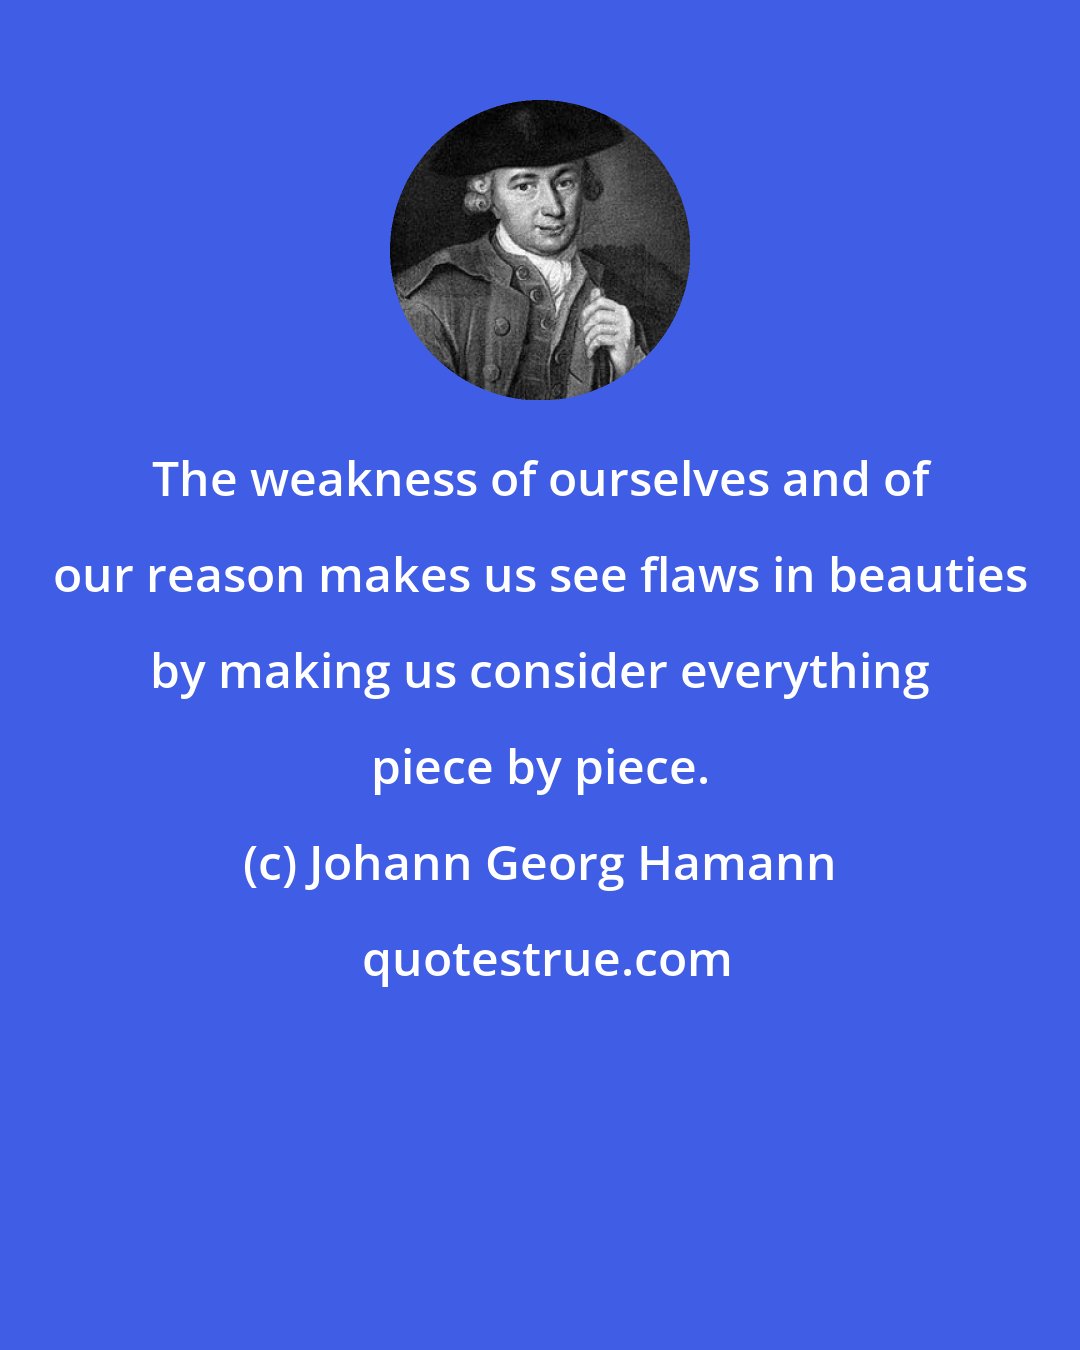 Johann Georg Hamann: The weakness of ourselves and of our reason makes us see flaws in beauties by making us consider everything piece by piece.